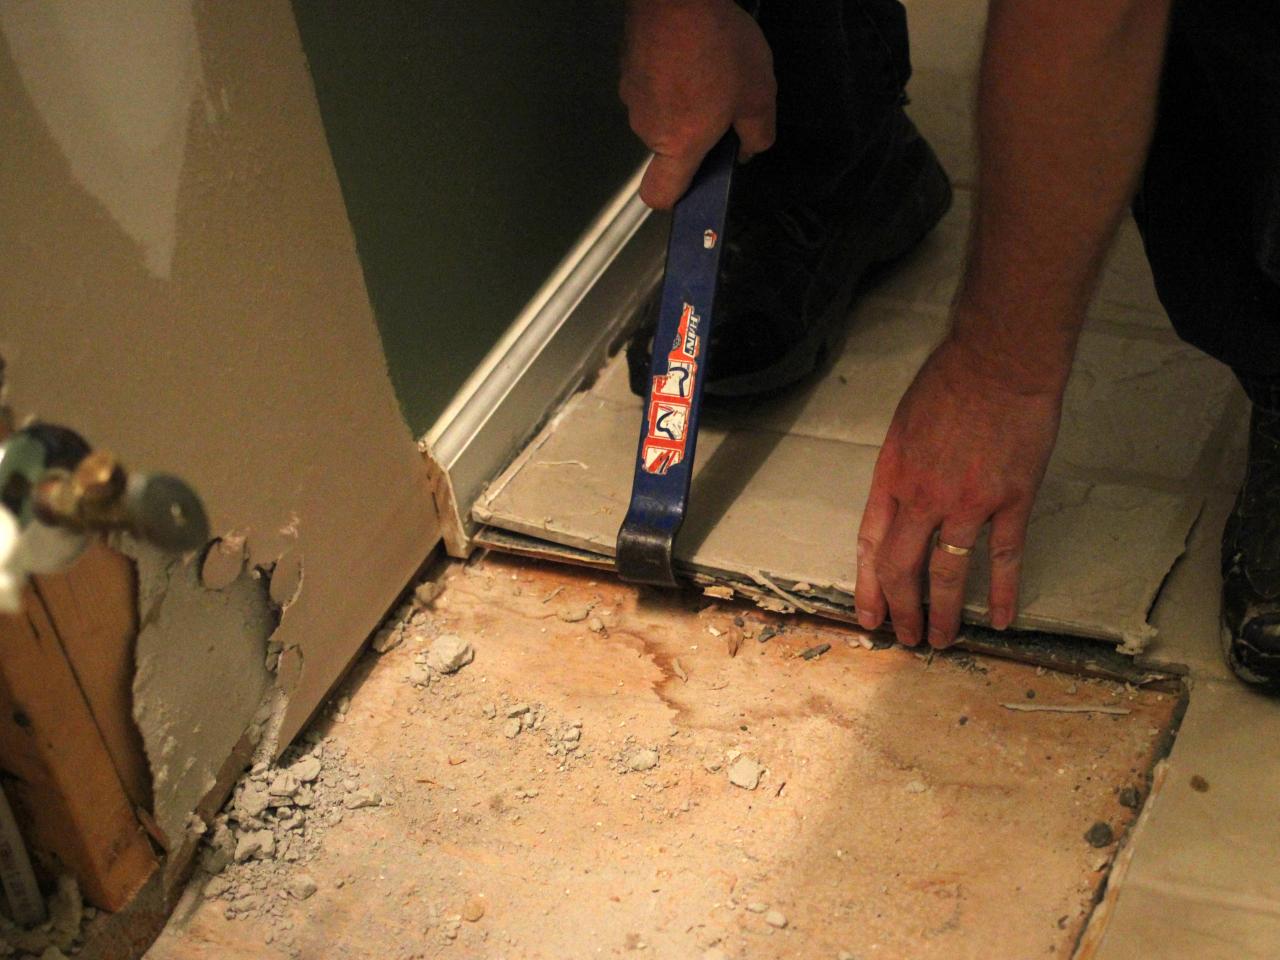 How To Remove A Tile Floor, Replace Bathroom Tile Floor